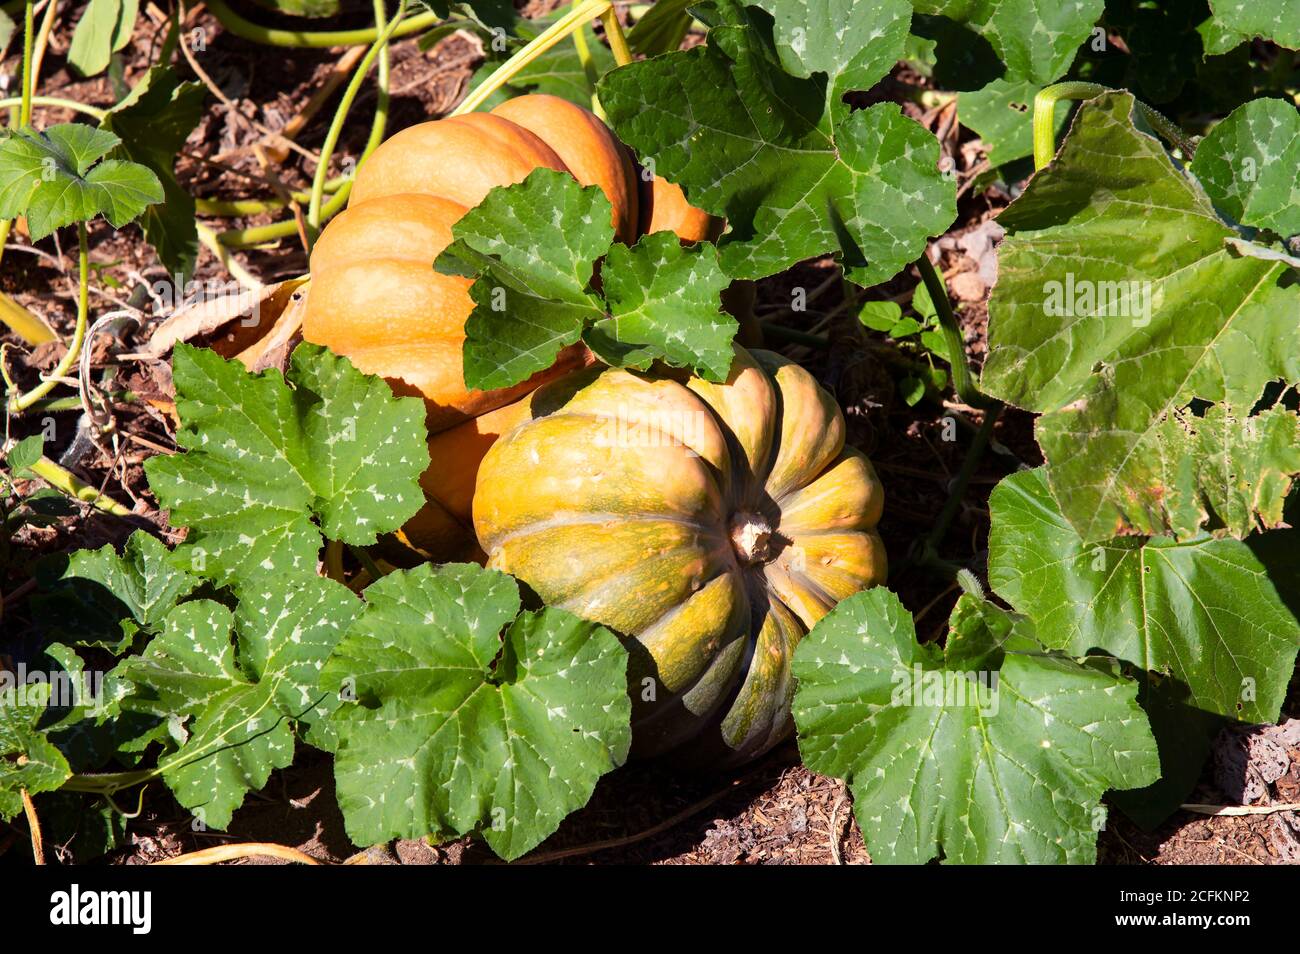 A pumpkin ready to harvest in a Cape Cod garden. Stock Photo